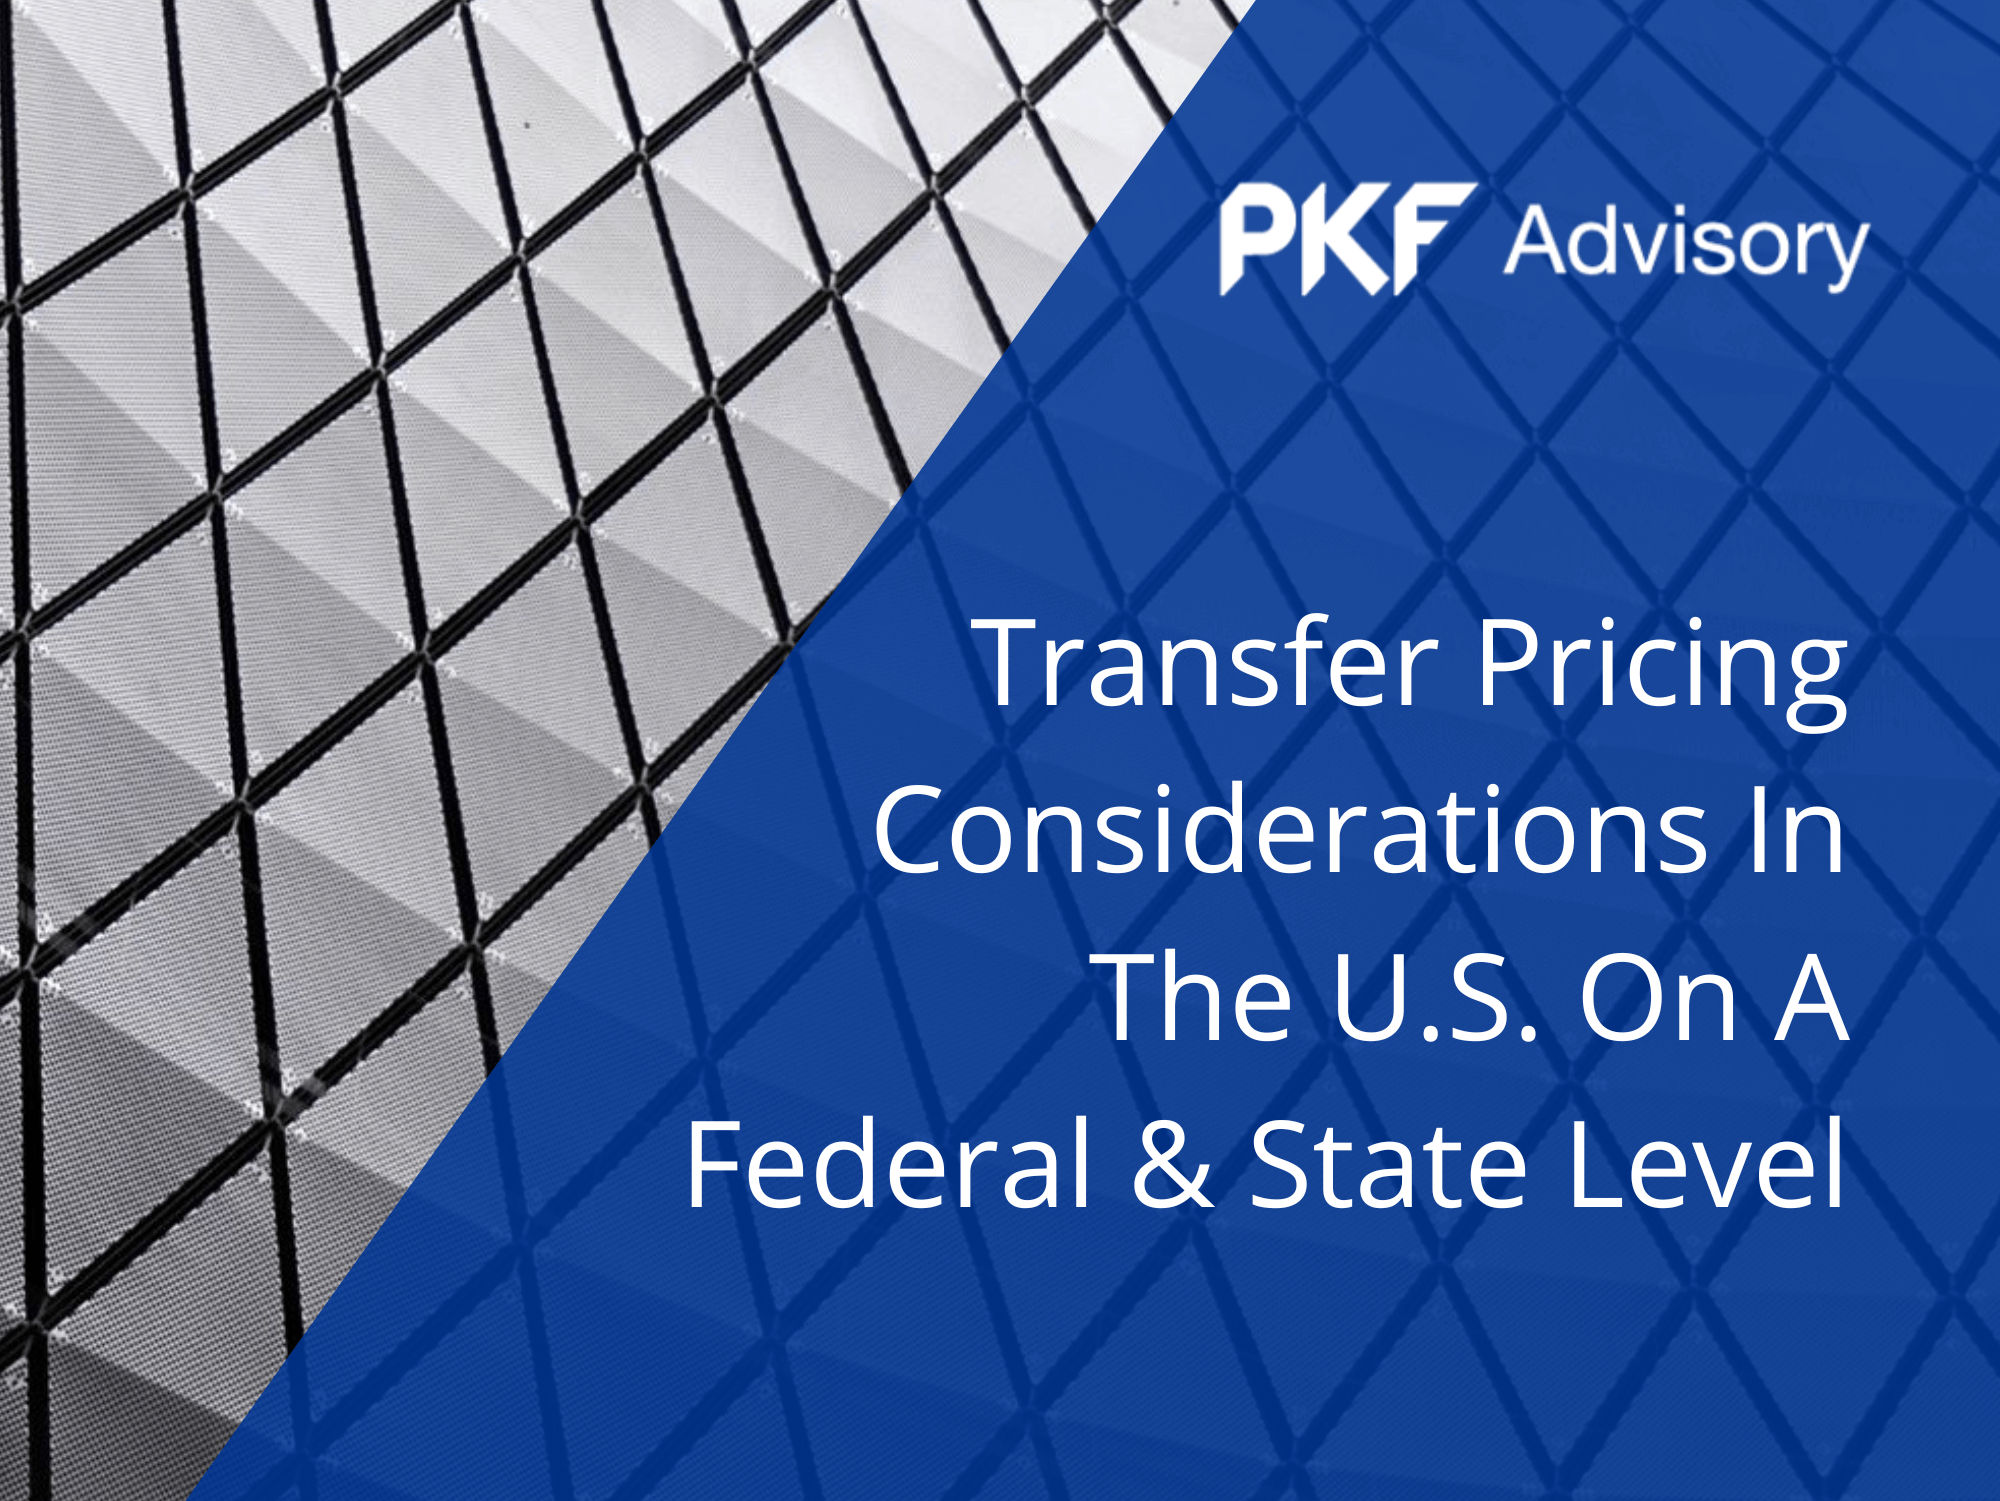 Transfer Pricing Considerations in the U.S. on a Federal & State Level